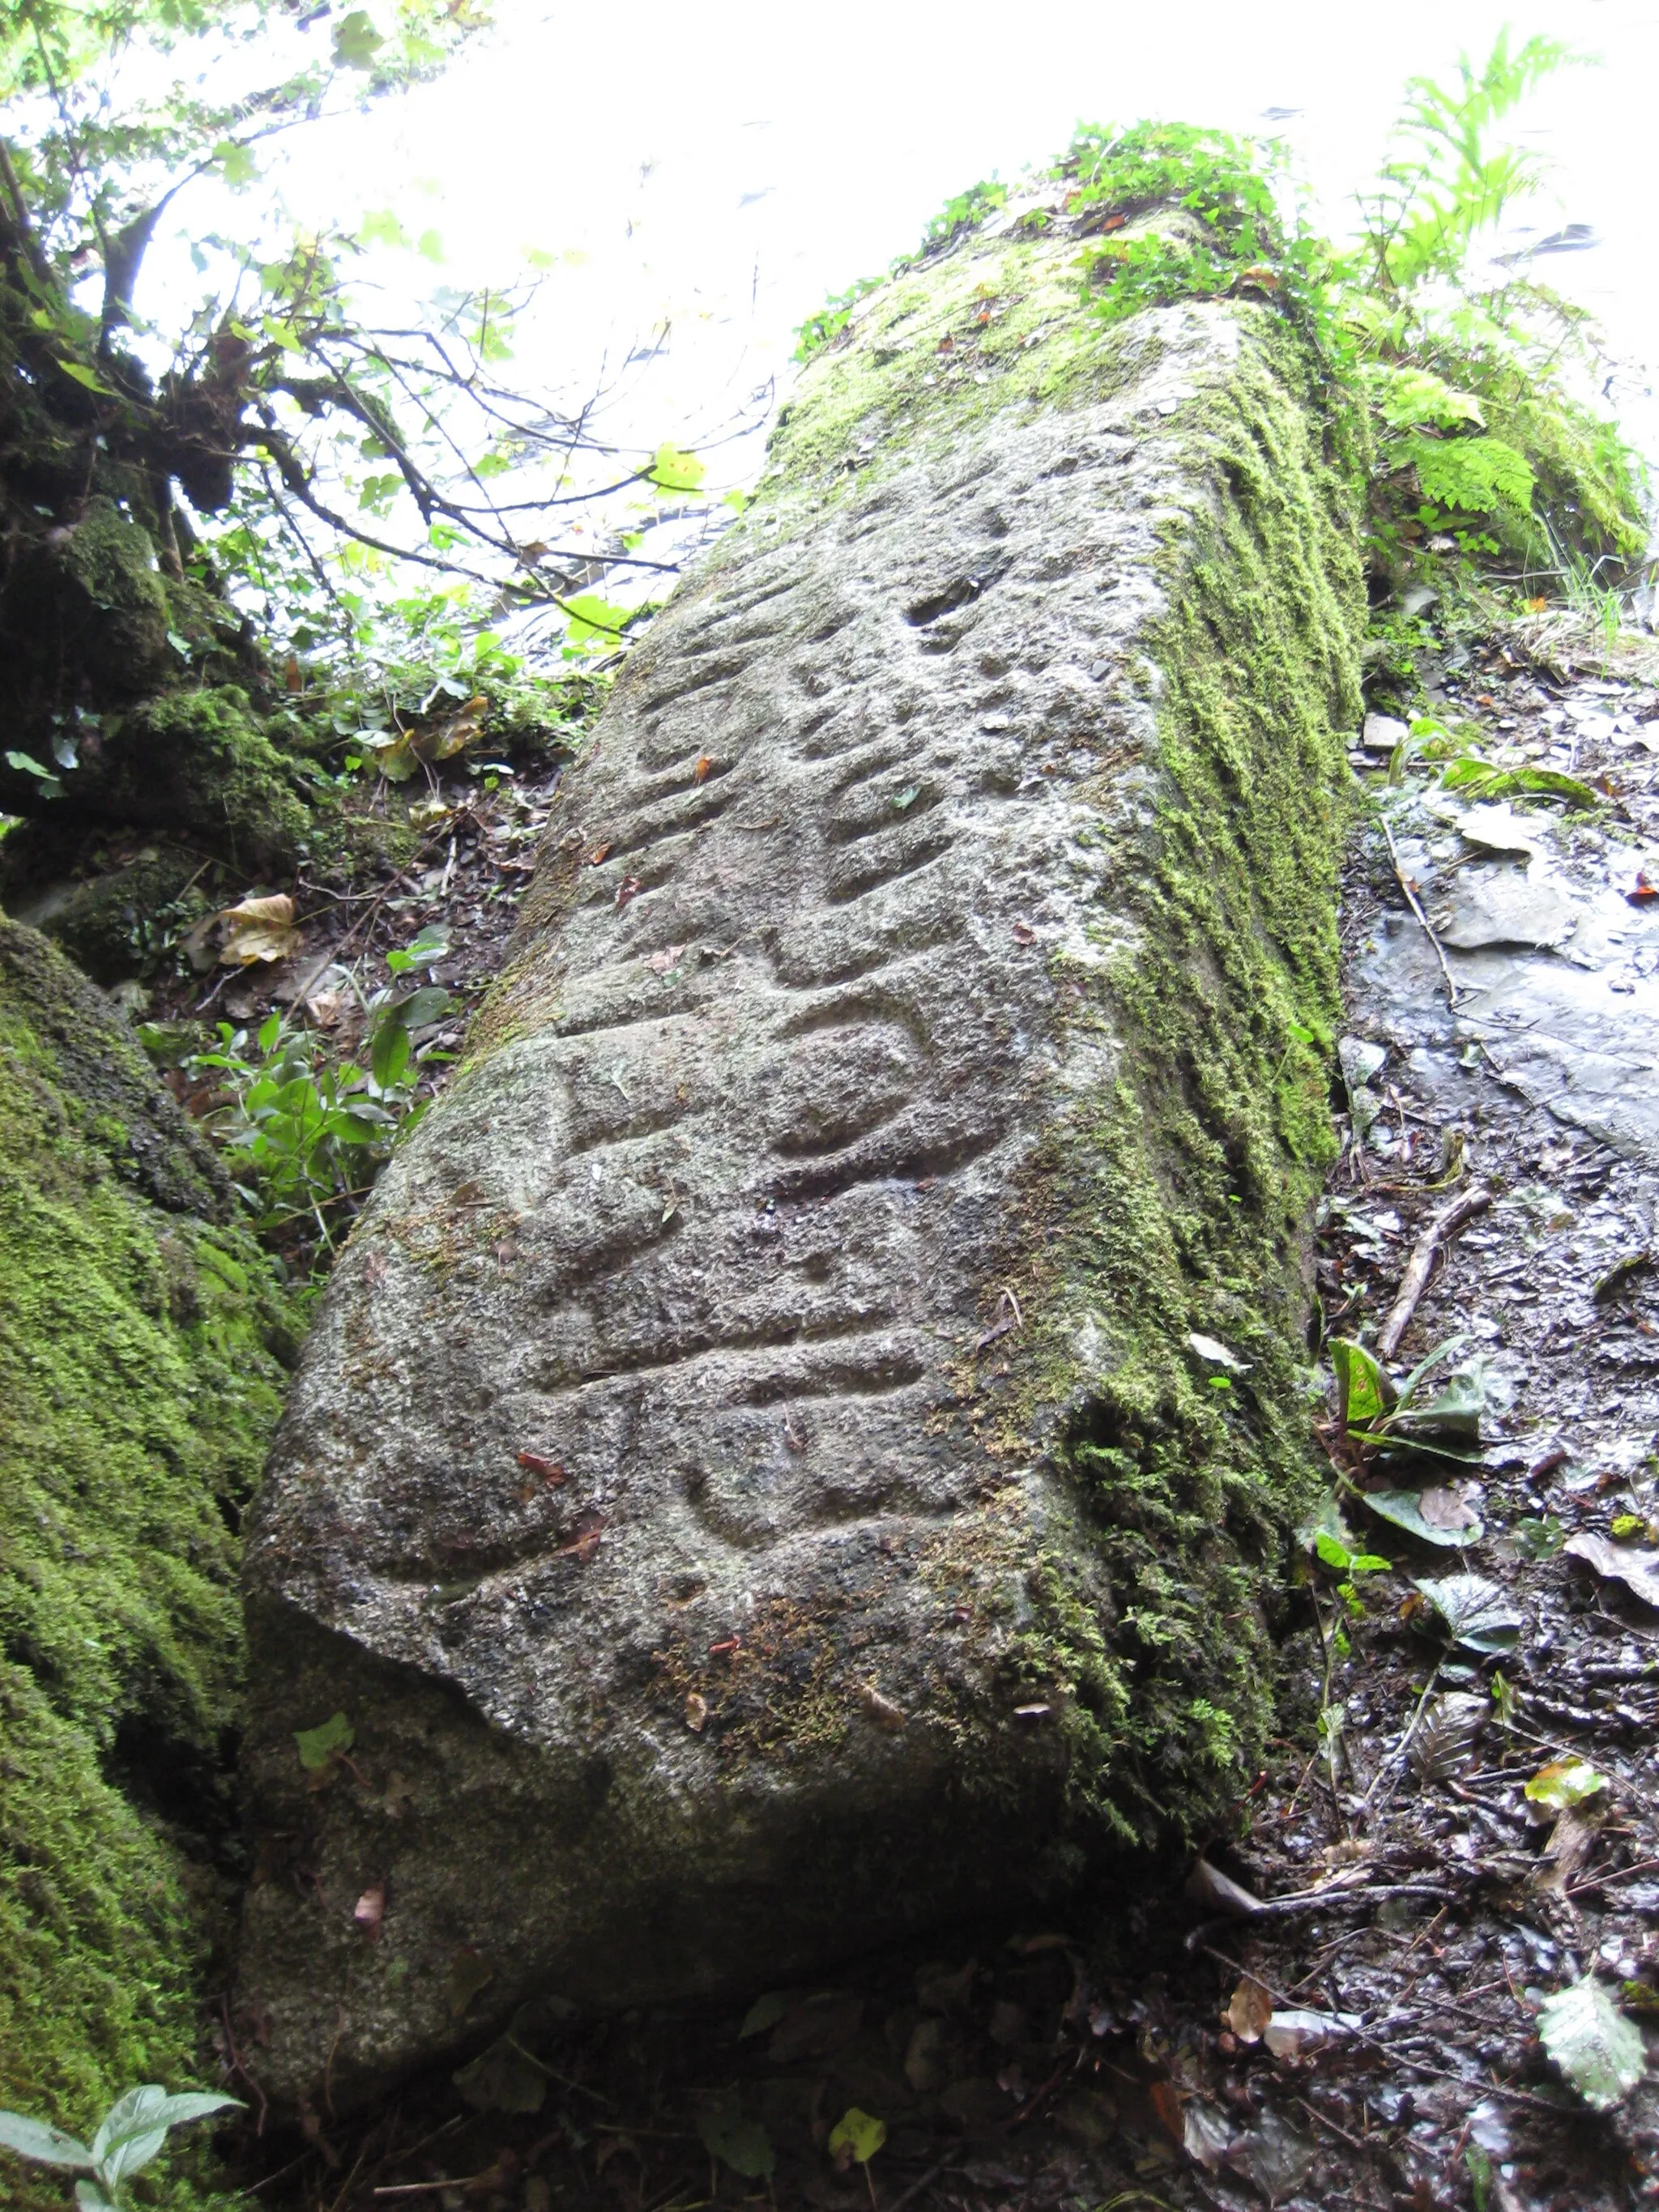 Photo showing: Inscribed stone on the bank of the River Camel, about 150 metres upstream from Slaughter Bridge, near Camelford, Cornwall (CISP WVALE/1). Inscribed "LATINI (H)IC IACIT FILIUS MAGARI" in the Latin script, and "LA[TI]NI" ᚂᚐᚈᚔᚅᚔ in the Ogham script (see File:Worthyvale ogham stone detail.JPG for detail showing the now almost illegible Ogham inscription).